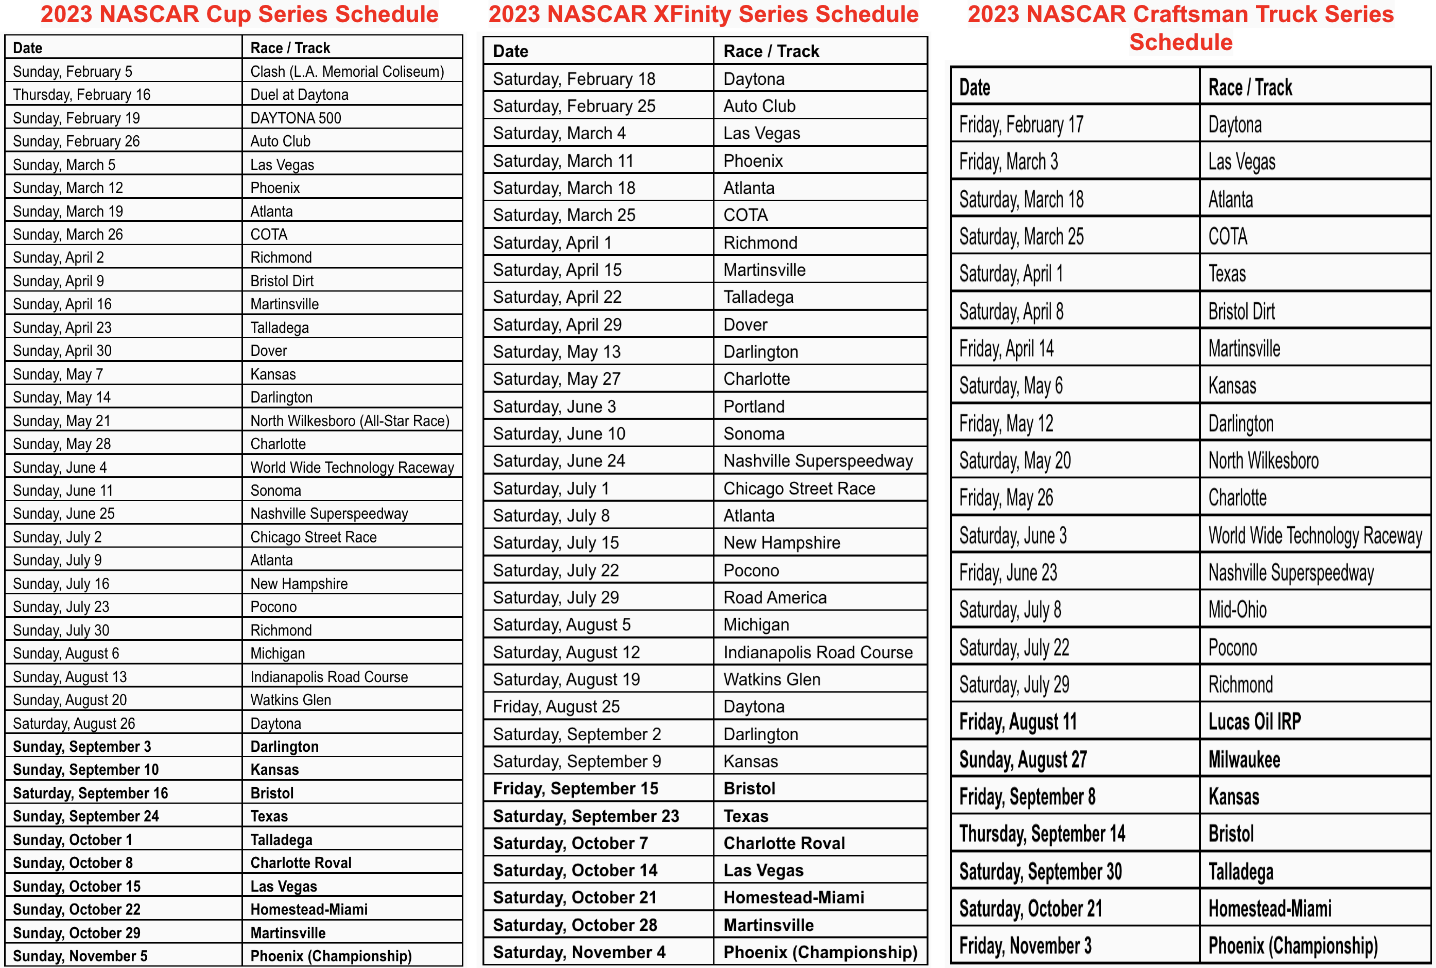 2023 Nascar Race Schedule Printable - Get Your Hands on Amazing Free